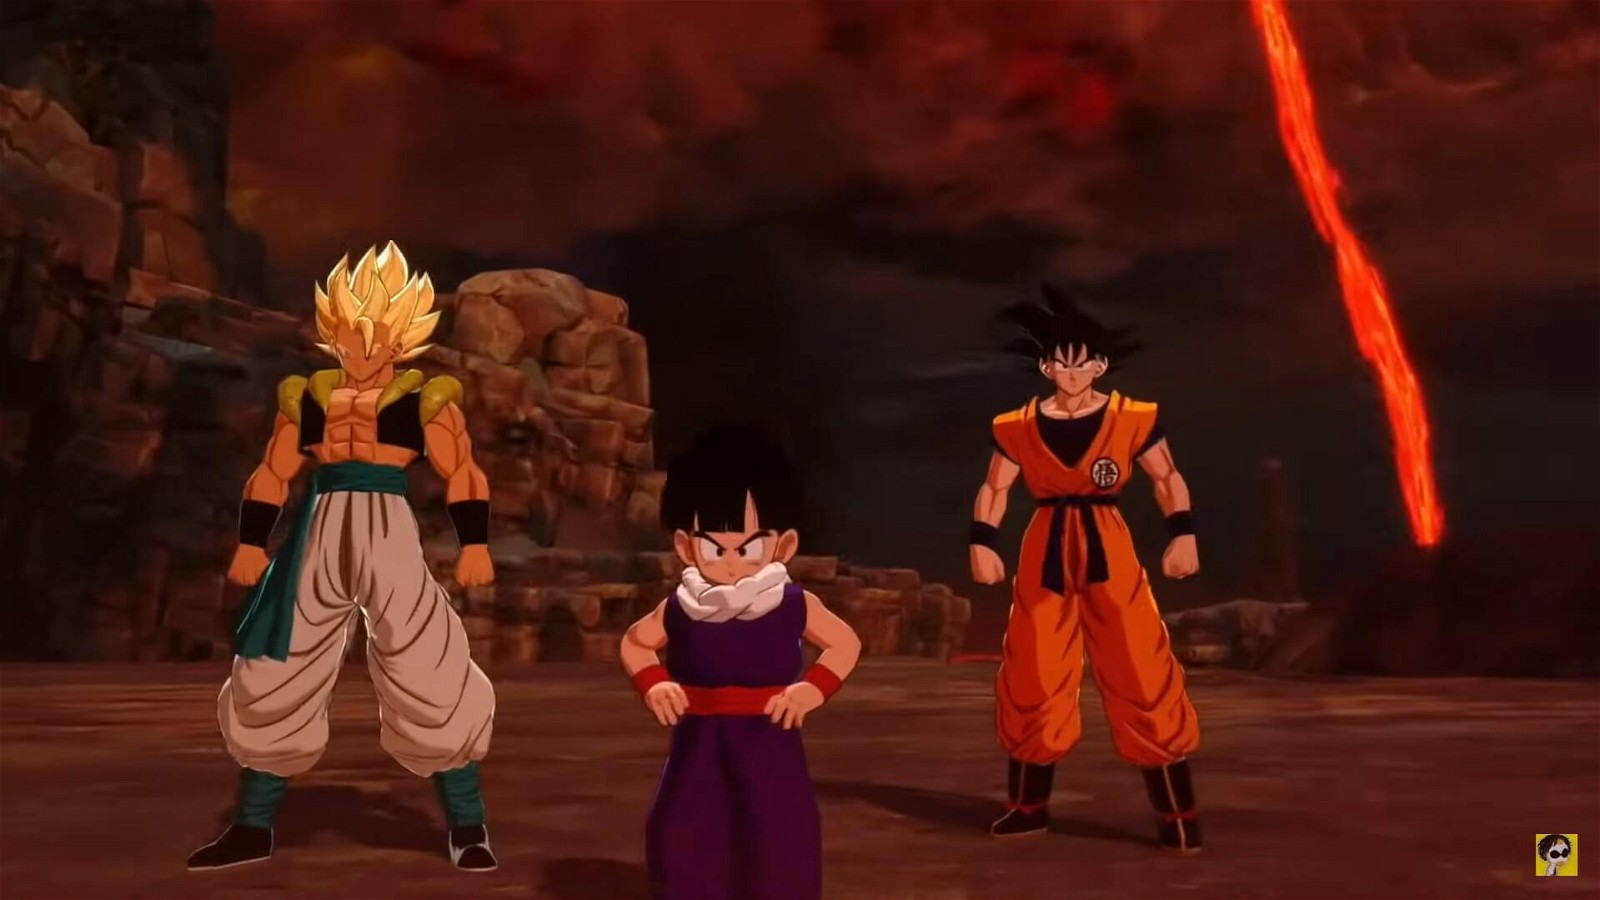 Gogeta, Kid Gohan, and Goku with a planetary hazard in the background. Credits: Tech Starr on YouTube